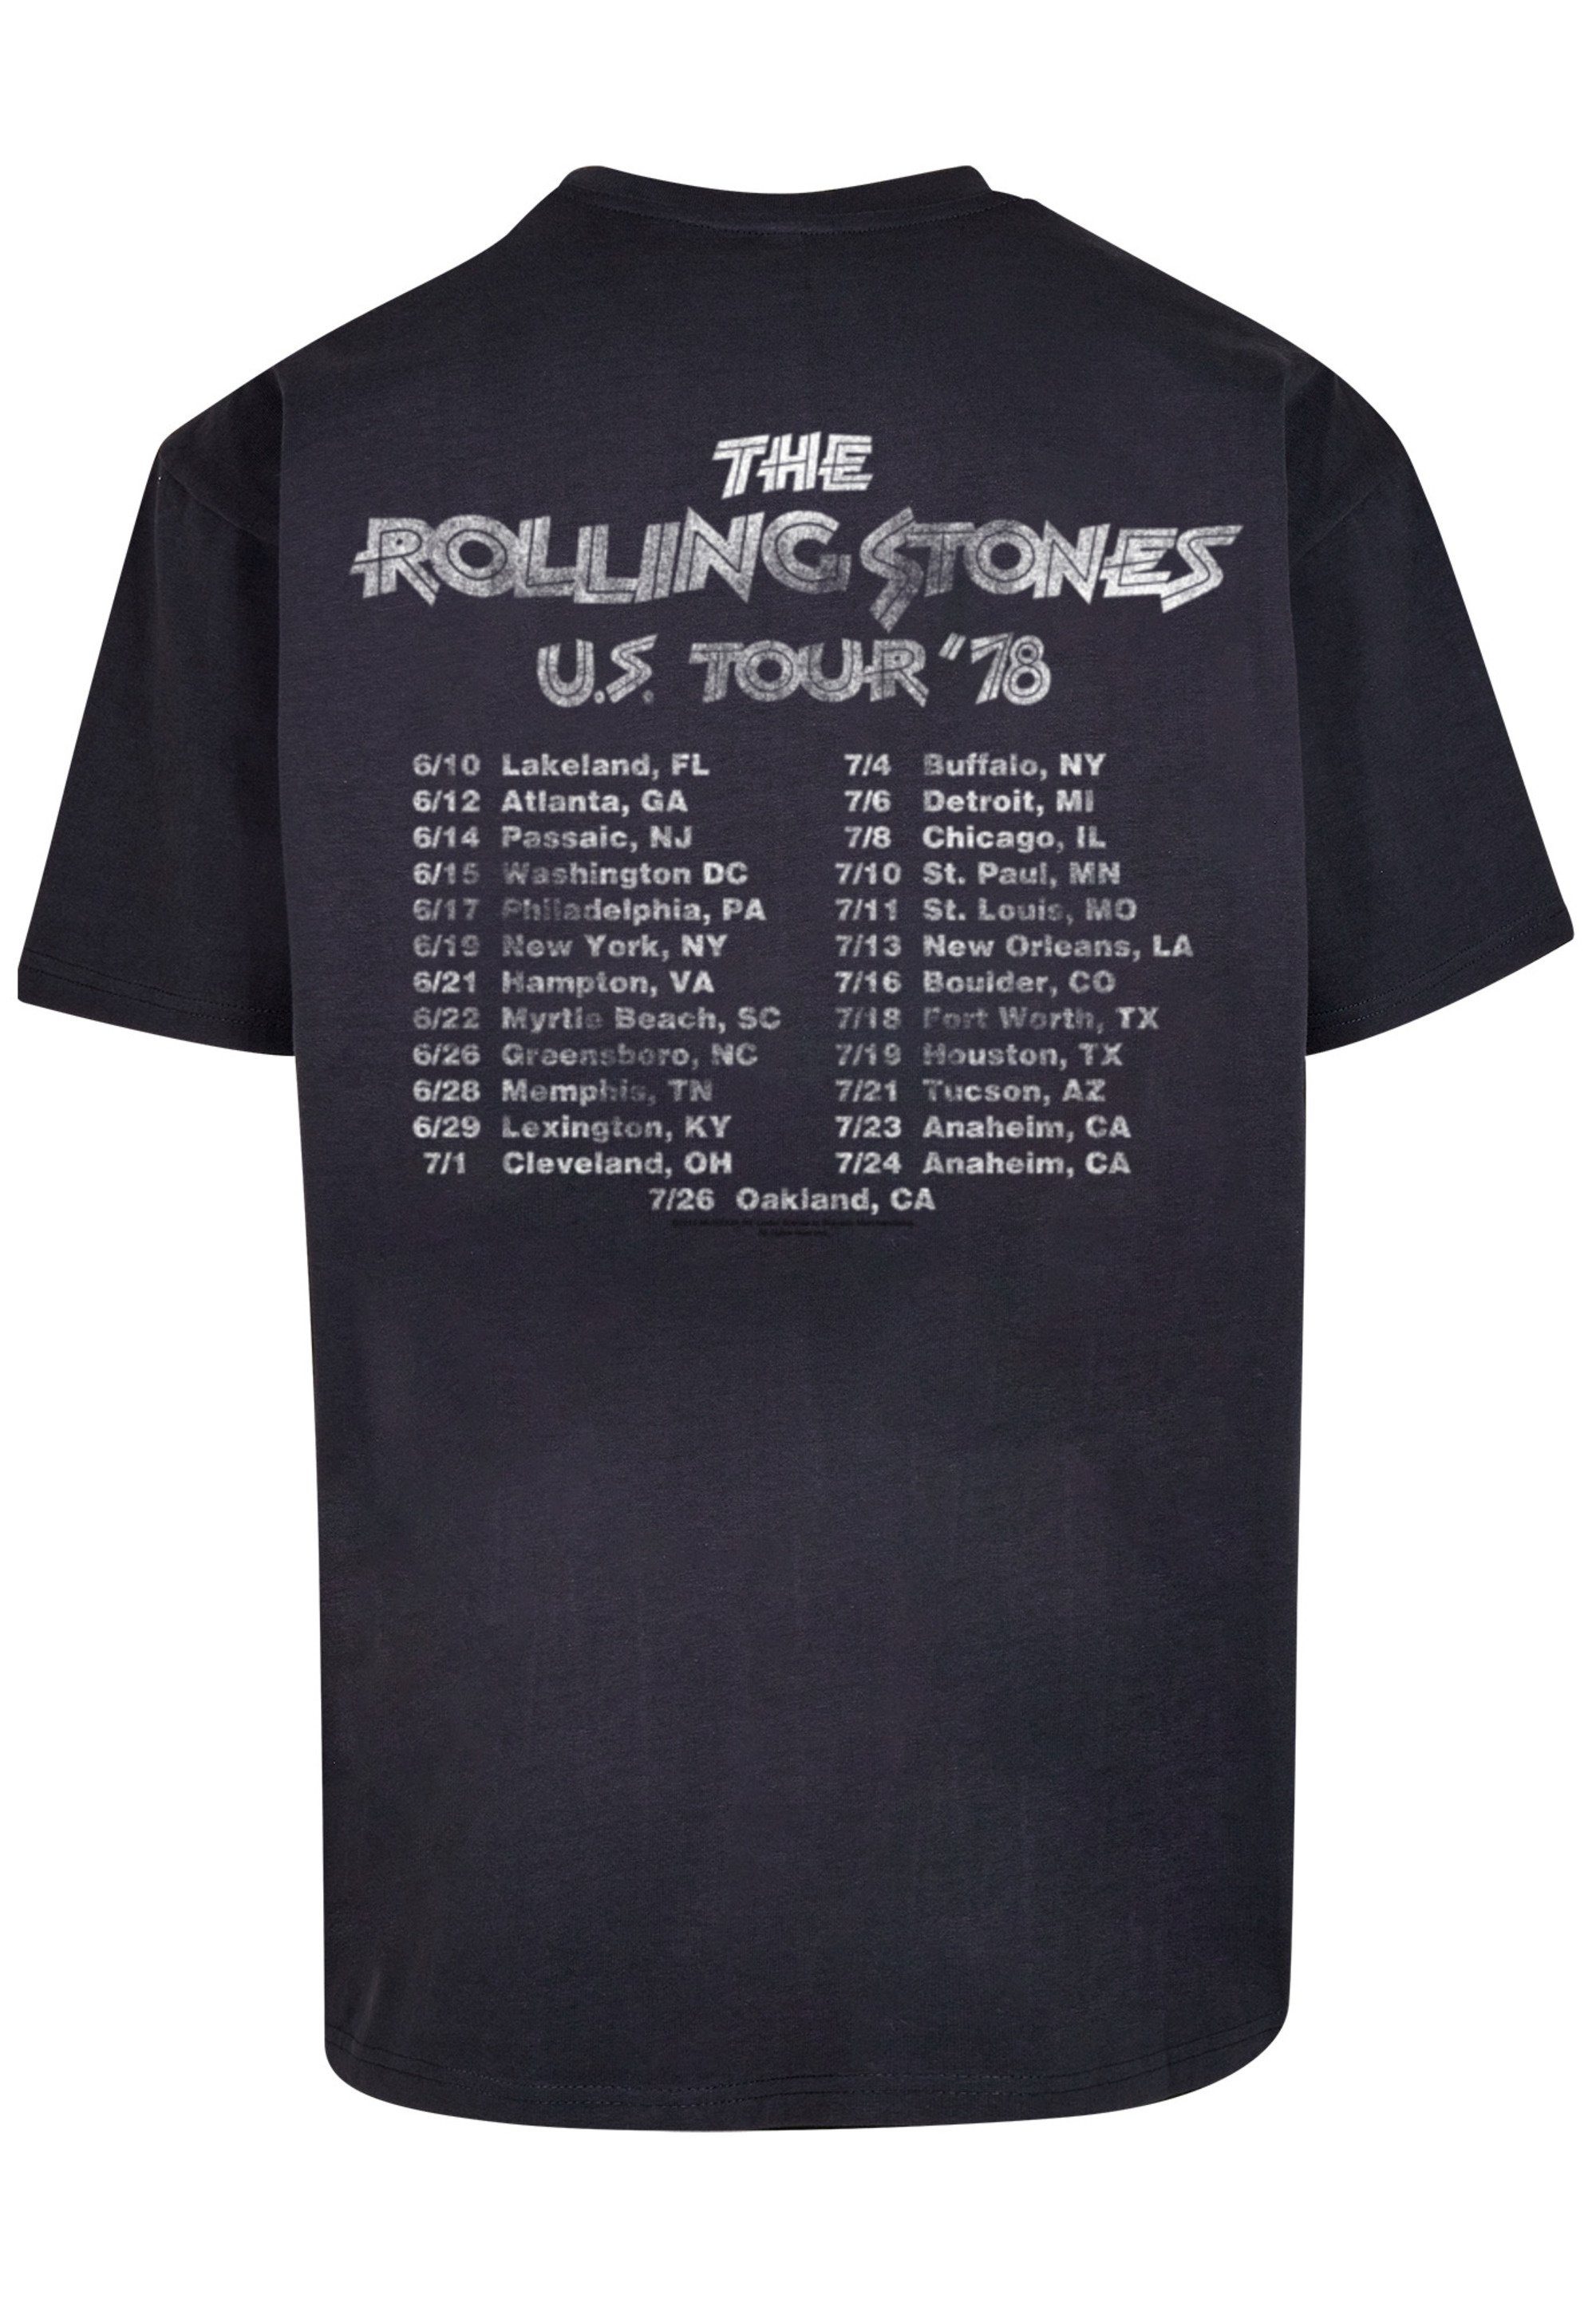 Tour '78 Rolling Print Front Band Stones F4NT4STIC US The T-Shirt Rock navy